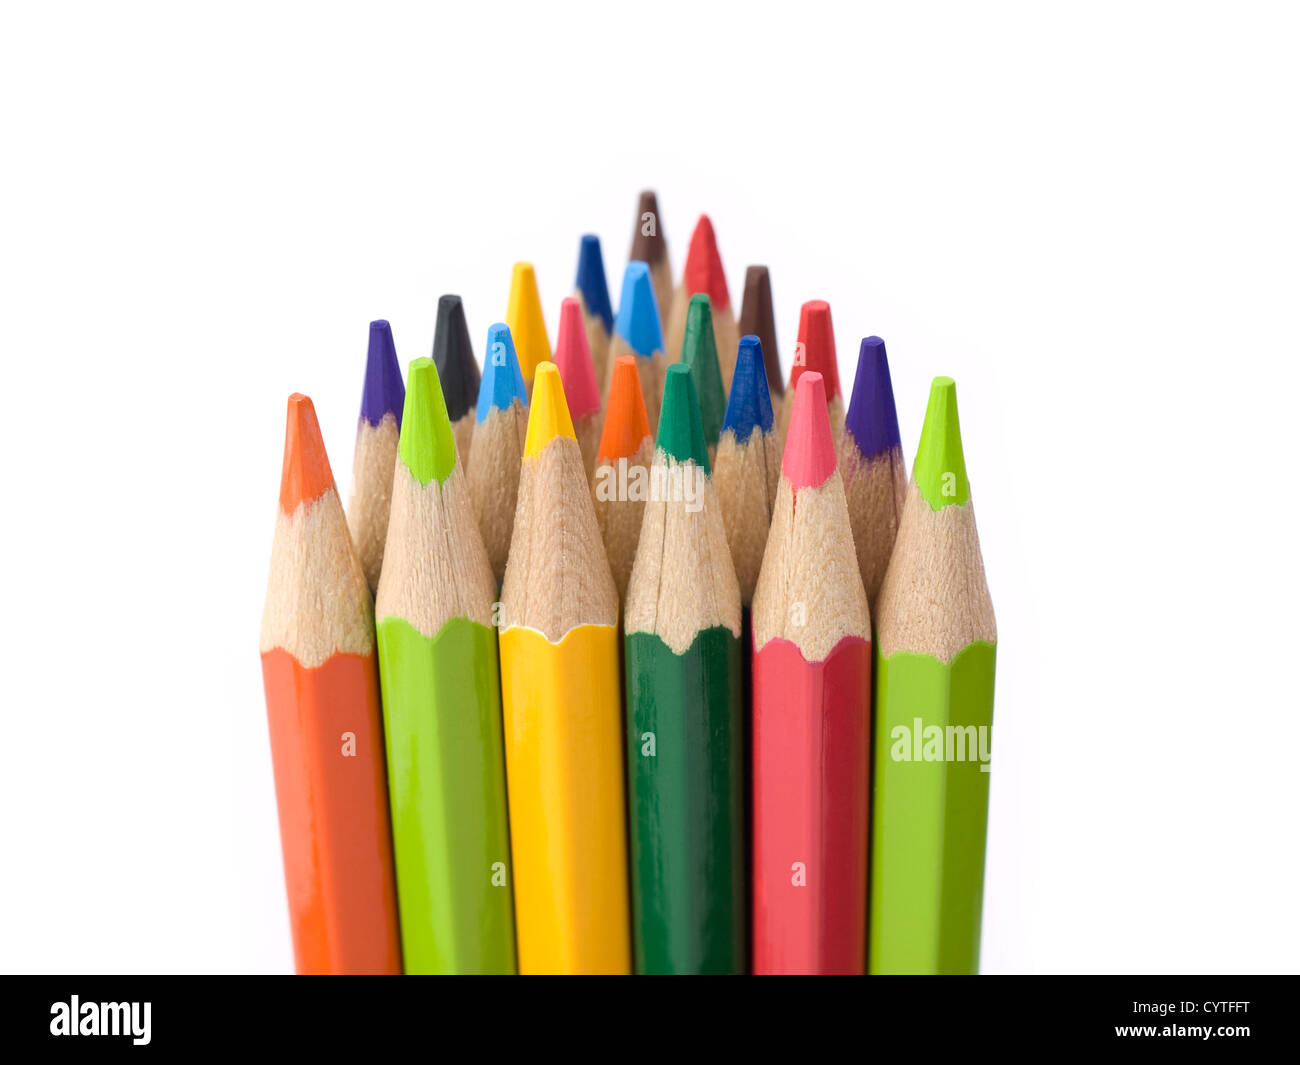 Several colored pencils stand together forming a triangle shape. Stock Photo